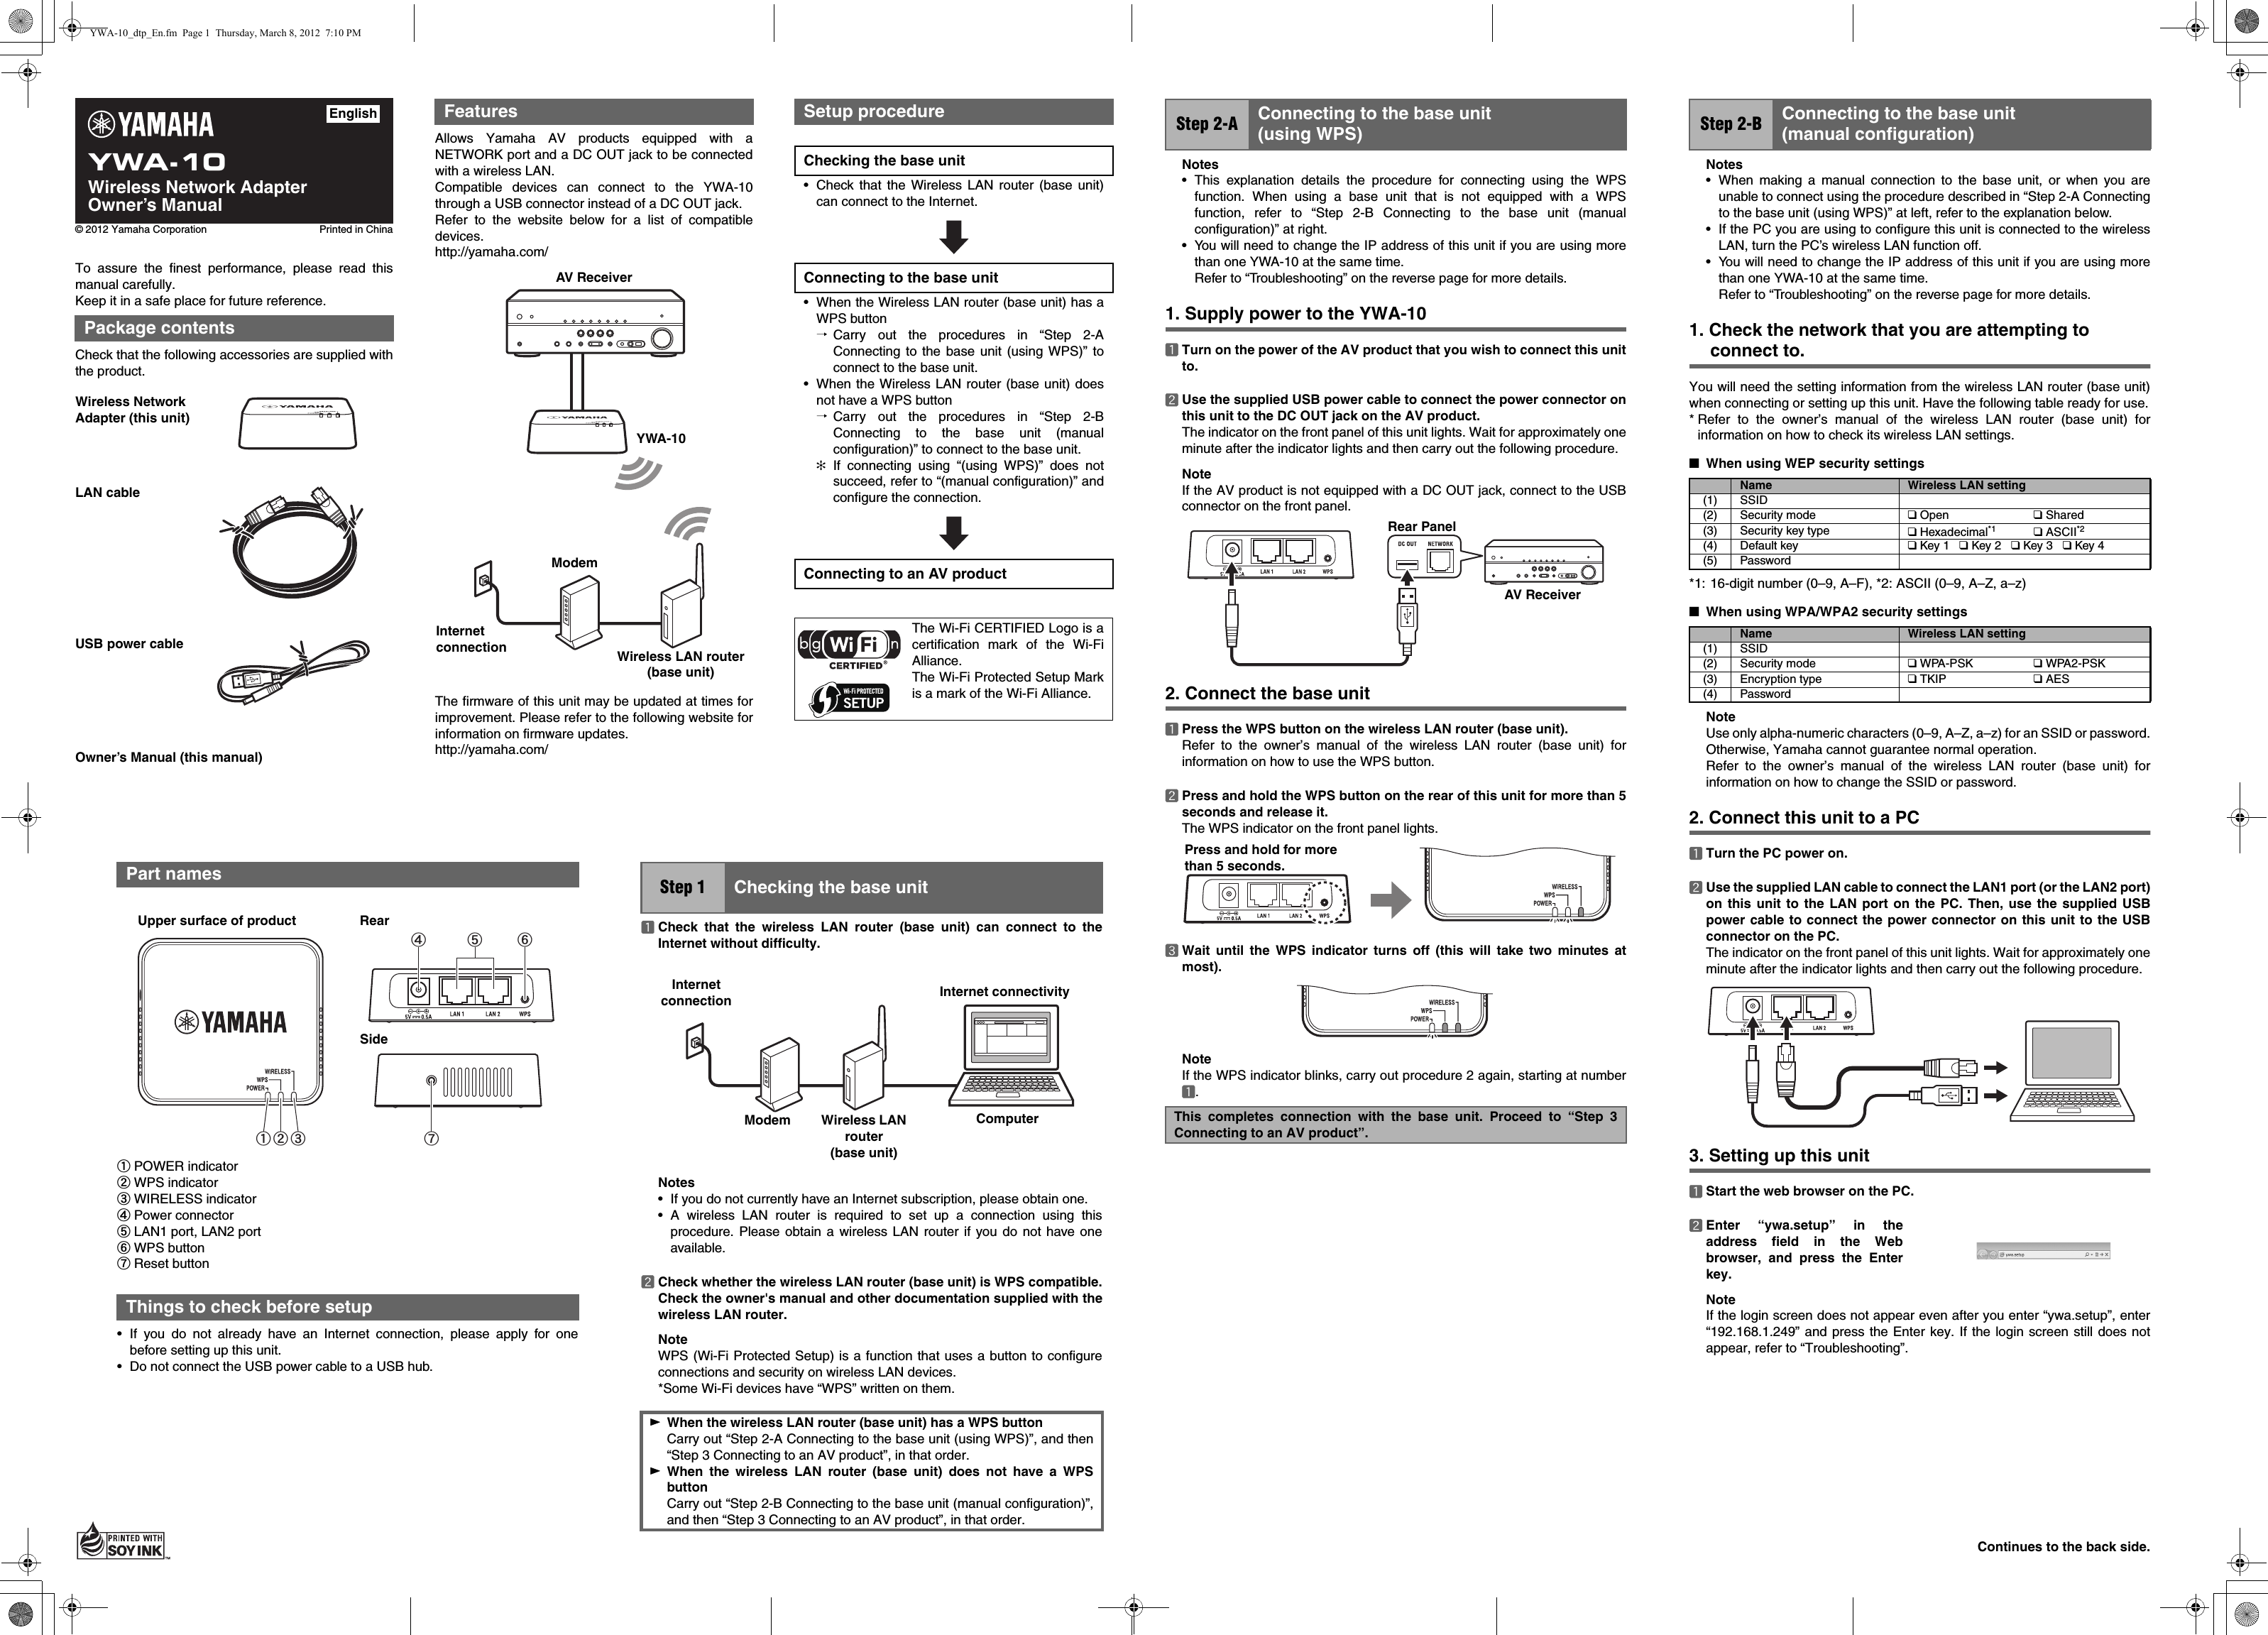 YWA-10Wireless Network AdapterOwner’s Manual© 2012 Yamaha Corporation Printed in ChinaEnglishAllows Yamaha AV products equipped with aNETWORK port and a DC OUT jack to be connectedwith a wireless LAN.Compatible devices can connect to the YWA-10through a USB connector instead of a DC OUT jack.Refer to the website below for a list of compatibledevices.http://yamaha.com/The firmware of this unit may be updated at times forimprovement. Please refer to the following website forinformation on firmware updates.http://yamaha.com/FeaturesAV ReceiverYWA-10Internet connectionModemWireless LAN router (base unit)Setup procedureChecking the base unit• Check that the Wireless LAN router (base unit)can connect to the Internet.Connecting to the base unit• When the Wireless LAN router (base unit) has aWPS button^Carry out the procedures in “Step 2-AConnecting to the base unit (using WPS)” toconnect to the base unit.• When the Wireless LAN router (base unit) doesnot have a WPS button^Carry out the procedures in “Step 2-BConnecting to the base unit (manualconfiguration)” to connect to the base unit.✻If connecting using “(using WPS)” does notsucceed, refer to “(manual configuration)” andconfigure the connection.Connecting to an AV productThe Wi-Fi CERTIFIED Logo is acertification mark of the Wi-FiAlliance.The Wi-Fi Protected Setup Markis a mark of the Wi-Fi Alliance.aPOWER indicatorbWPS indicatorcWIRELESS indicatordPower connectoreLAN1 port, LAN2 portfWPS buttongReset button• If you do not already have an Internet connection, please apply for onebefore setting up this unit.• Do not connect the USB power cable to a USB hub.Part namesThings to check before setupa bd e fgcUpper surface of product RearSideaCheck that the wireless LAN router (base unit) can connect to theInternet without difficulty.Notes• If you do not currently have an Internet subscription, please obtain one.• A wireless LAN router is required to set up a connection using thisprocedure. Please obtain a wireless LAN router if you do not have oneavailable.bCheck whether the wireless LAN router (base unit) is WPS compatible.Check the owner&apos;s manual and other documentation supplied with thewireless LAN router.NoteWPS (Wi-Fi Protected Setup) is a function that uses a button to configureconnections and security on wireless LAN devices.*Some Wi-Fi devices have “WPS” written on them.Step 1 Checking the base unitWWhen the wireless LAN router (base unit) has a WPS buttonCarry out “Step 2-A Connecting to the base unit (using WPS)”, and then“Step 3 Connecting to an AV product”, in that order.WWhen the wireless LAN router (base unit) does not have a WPSbuttonCarry out “Step 2-B Connecting to the base unit (manual configuration)”,and then “Step 3 Connecting to an AV product”, in that order.ComputerInternet connectivityWireless LAN router (base unit)ModemInternet connectionNotes• This explanation details the procedure for connecting using the WPSfunction. When using a base unit that is not equipped with a WPSfunction, refer to “Step 2-B Connecting to the base unit (manualconfiguration)” at right.• You will need to change the IP address of this unit if you are using morethan one YWA-10 at the same time.Refer to “Troubleshooting” on the reverse page for more details.1. Supply power to the YWA-10aTurn on the power of the AV product that you wish to connect this unitto.bUse the supplied USB power cable to connect the power connector onthis unit to the DC OUT jack on the AV product.The indicator on the front panel of this unit lights. Wait for approximately oneminute after the indicator lights and then carry out the following procedure.NoteIf the AV product is not equipped with a DC OUT jack, connect to the USBconnector on the front panel.2. Connect the base unitaPress the WPS button on the wireless LAN router (base unit).Refer to the owner’s manual of the wireless LAN router (base unit) forinformation on how to use the WPS button.bPress and hold the WPS button on the rear of this unit for more than 5seconds and release it.The WPS indicator on the front panel lights.cWait until the WPS indicator turns off (this will take two minutes atmost).NoteIf the WPS indicator blinks, carry out procedure 2 again, starting at numbera.Step 2-A Connecting to the base unit (using WPS)This completes connection with the base unit. Proceed to “Step 3Connecting to an AV product”.AV ReceiverRear PanelPress and hold for more than 5 seconds.Notes• When making a manual connection to the base unit, or when you areunable to connect using the procedure described in “Step 2-A Connectingto the base unit (using WPS)” at left, refer to the explanation below.• If the PC you are using to configure this unit is connected to the wirelessLAN, turn the PC’s wireless LAN function off.• You will need to change the IP address of this unit if you are using morethan one YWA-10 at the same time. Refer to “Troubleshooting” on the reverse page for more details.1. Check the network that you are attempting to connect to.You will need the setting information from the wireless LAN router (base unit)when connecting or setting up this unit. Have the following table ready for use.* Refer to the owner’s manual of the wireless LAN router (base unit) forinformation on how to check its wireless LAN settings.■When using WEP security settings*1: 16-digit number (0–9, A–F), *2: ASCII (0–9, A–Z, a–z)■When using WPA/WPA2 security settingsNoteUse only alpha-numeric characters (0–9, A–Z, a–z) for an SSID or password.Otherwise, Yamaha cannot guarantee normal operation.Refer to the owner’s manual of the wireless LAN router (base unit) forinformation on how to change the SSID or password.2. Connect this unit to a PCaTurn the PC power on.bUse the supplied LAN cable to connect the LAN1 port (or the LAN2 port)on this unit to the LAN port on the PC. Then, use the supplied USBpower cable to connect the power connector on this unit to the USBconnector on the PC.The indicator on the front panel of this unit lights. Wait for approximately oneminute after the indicator lights and then carry out the following procedure.3. Setting up this unitaStart the web browser on the PC.bEnter “ywa.setup” in theaddress field in the Webbrowser, and press the Enterkey.NoteIf the login screen does not appear even after you enter “ywa.setup”, enter“192.168.1.249” and press the Enter key. If the login screen still does notappear, refer to “Troubleshooting”.Step 2-B Connecting to the base unit (manual configuration)Name Wireless LAN setting(1) SSID(2) Security mode ❑ Open ❑ Shared(3) Security key type ❑ Hexadecimal*1 ❑ ASCII*2(4) Default key ❑ Key 1   ❑ Key 2   ❑ Key 3   ❑ Key 4(5) PasswordName Wireless LAN setting(1) SSID(2) Security mode ❑ WPA-PSK ❑ WPA2-PSK(3) Encryption type ❑ TKIP ❑ AES(4) PasswordTo assure the finest performance, please read thismanual carefully.Keep it in a safe place for future reference.Check that the following accessories are supplied withthe product.Owner’s Manual (this manual)Package contentsWireless Network Adapter (this unit)LAN cableUSB power cableContinues to the back side.YWA-10_dtp_En.fm  Page 1  Thursday, March 8, 2012  7:10 PM